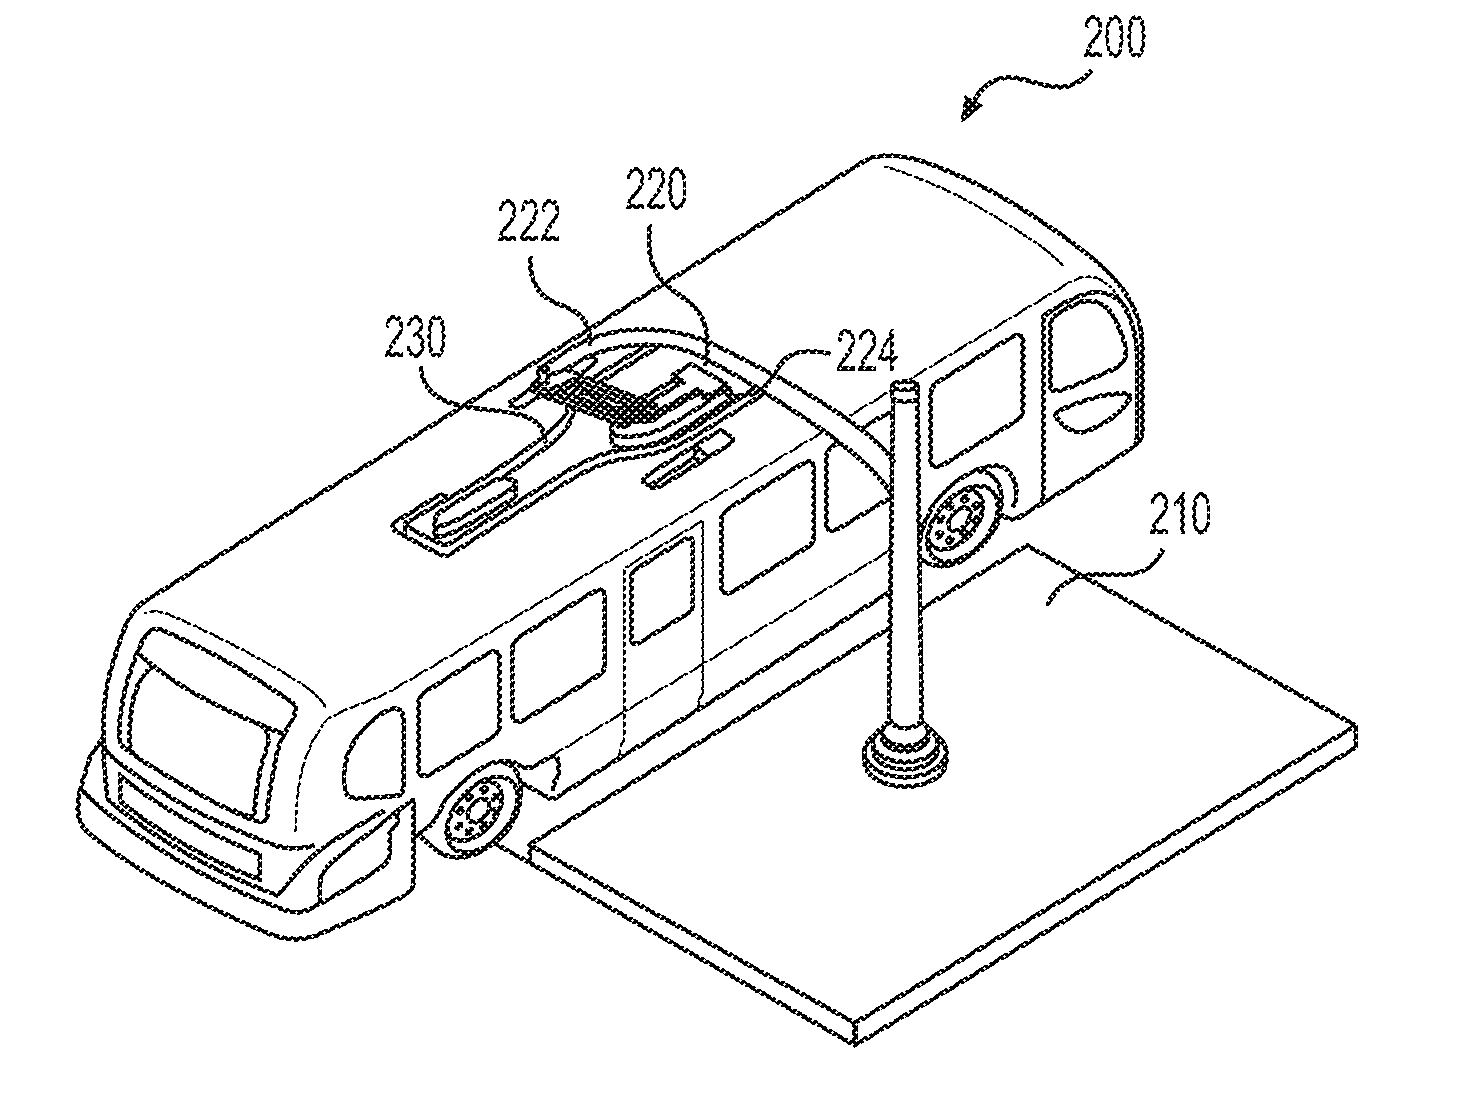 Systems and methods for charging an electric vehicle at a charging station